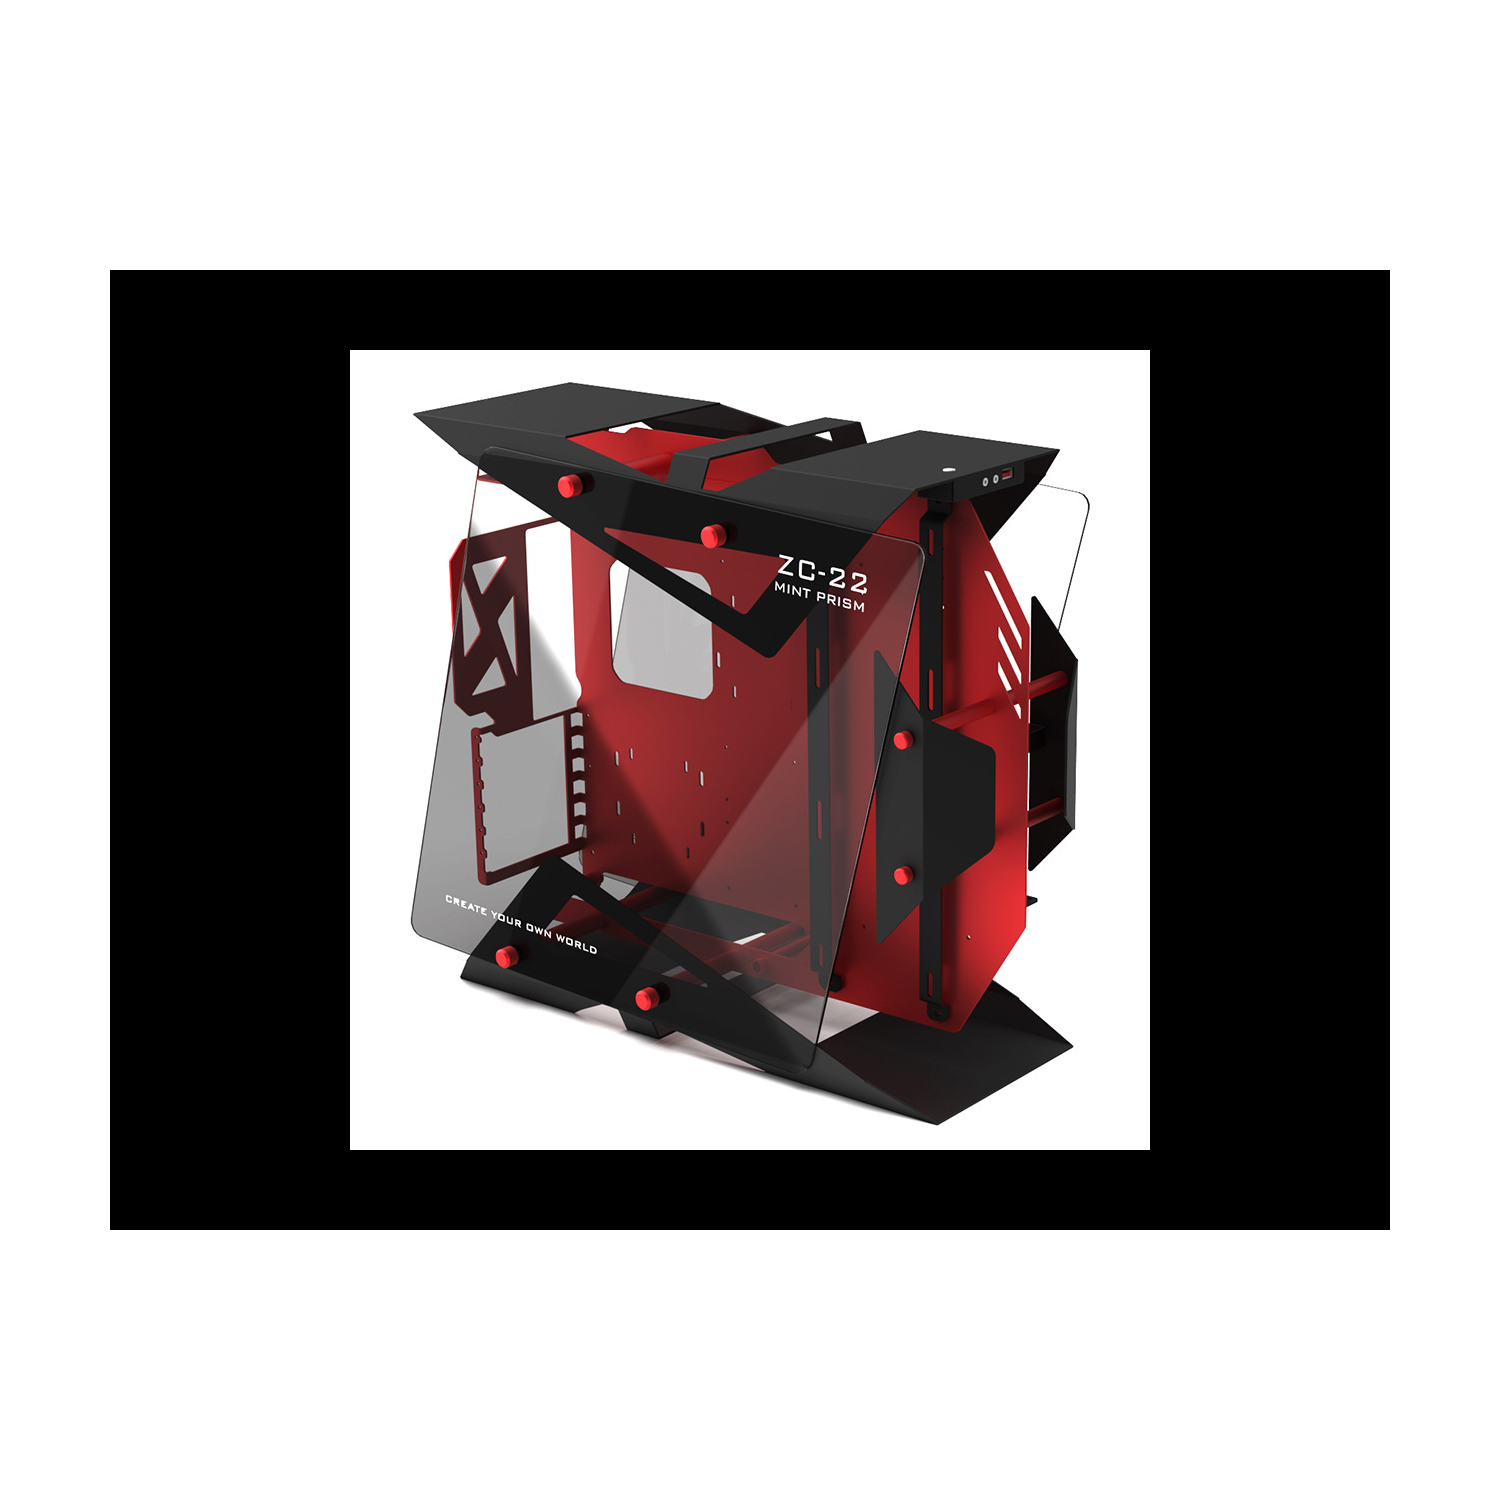 H.E. ZC-22 Mint Prism Tempered Glass Computer Case Support 360mm Radiator Support M-ATX Motherboard USB3.0 -Red & Black